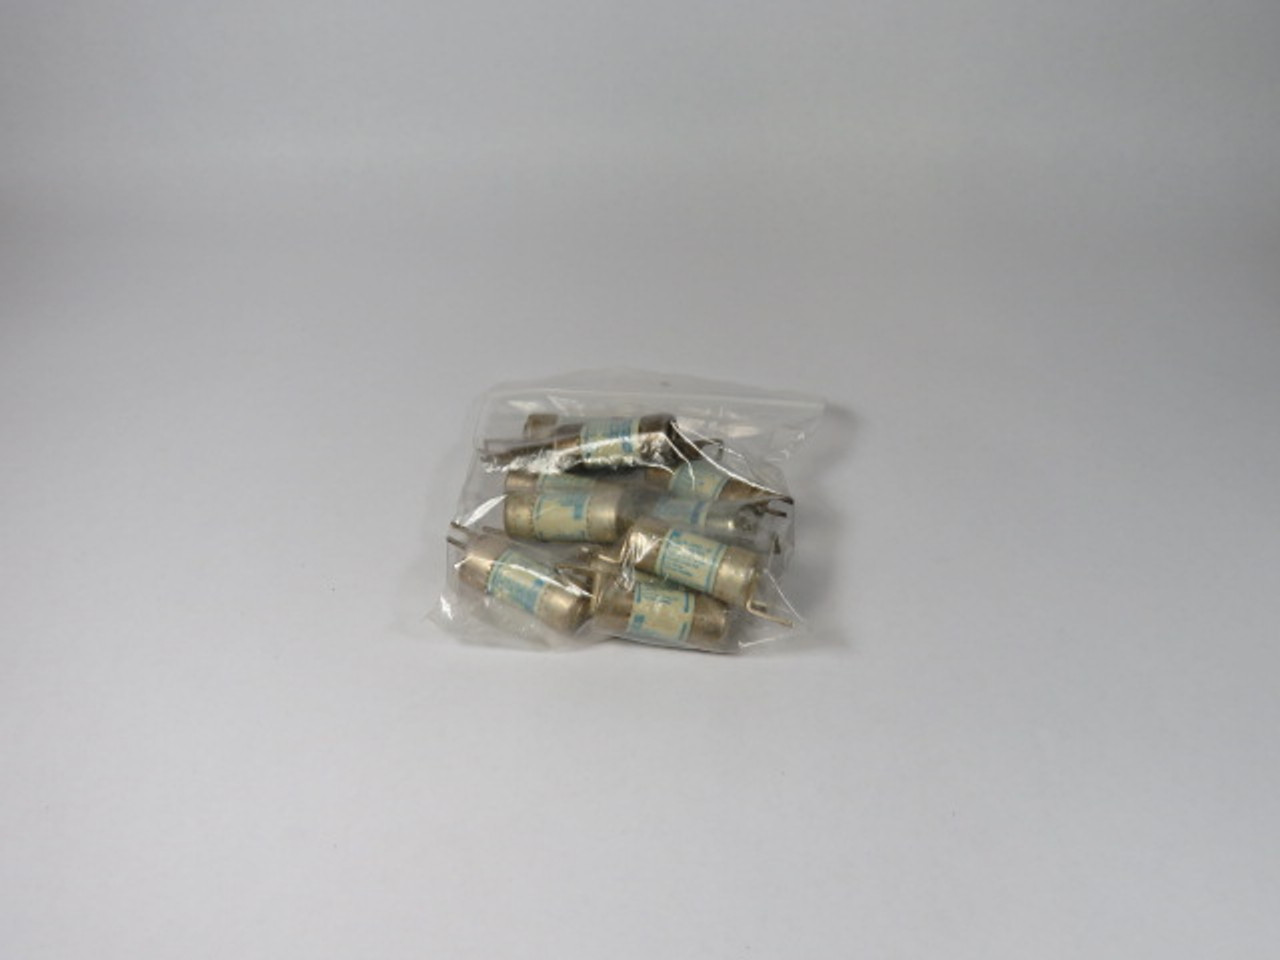 Gould FES10 Open Hole Current Limiting Fuse 10A 600V Lot of 10 USED